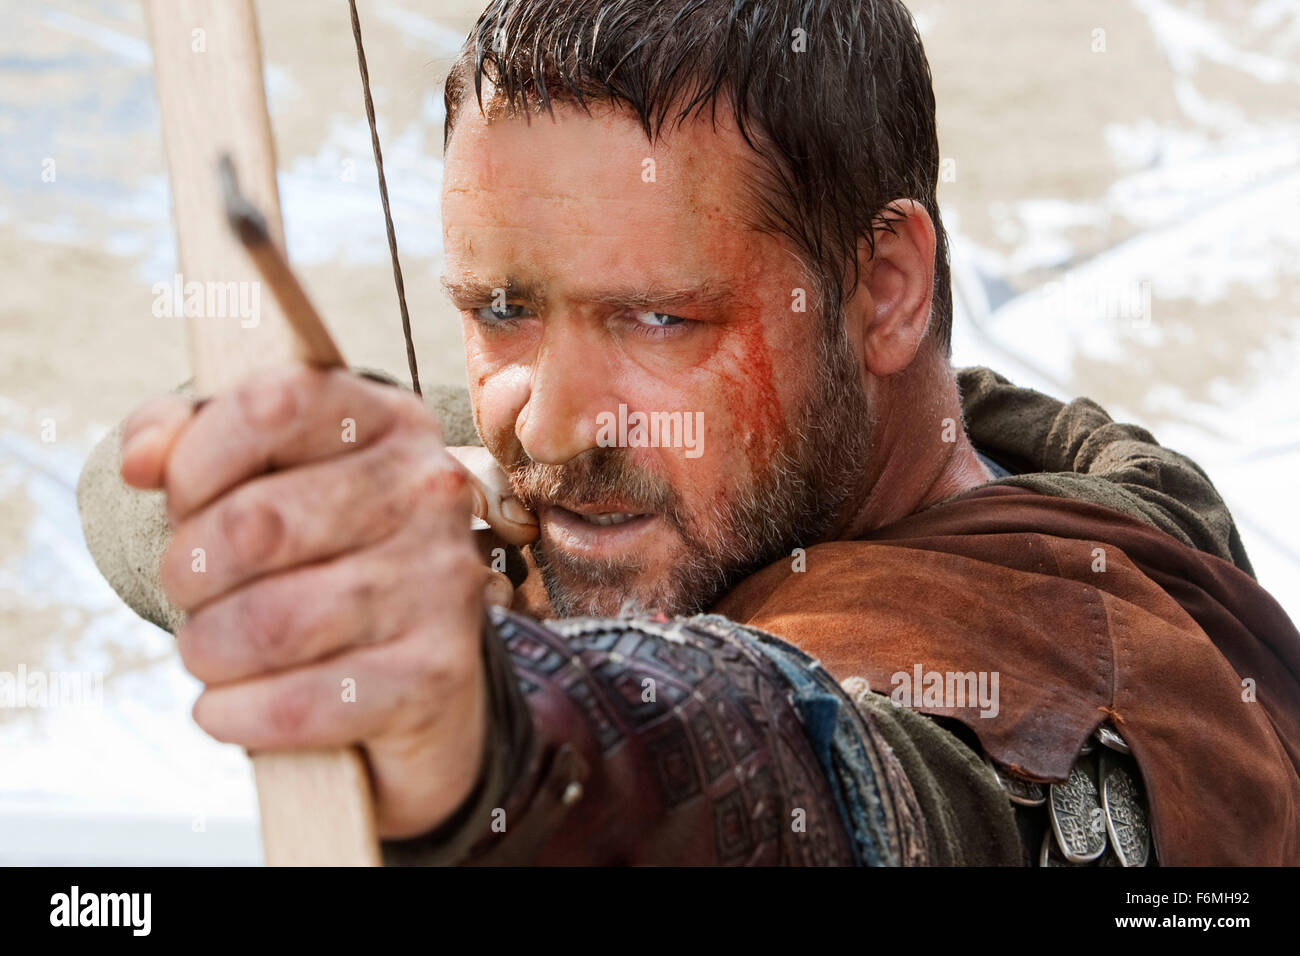 RELEASE DATE: May 14, 2010. MOVIE TITLE: Robin Hood. STUDIO: Universal Pictures. PLOT: The story of an archer in the army of Richard Coeur de Lion who fights against the Norman invaders and becomes the legendary hero known as Robin Hood. PICTURED: RUSSELL CROWE as Robin Hood. Stock Photo